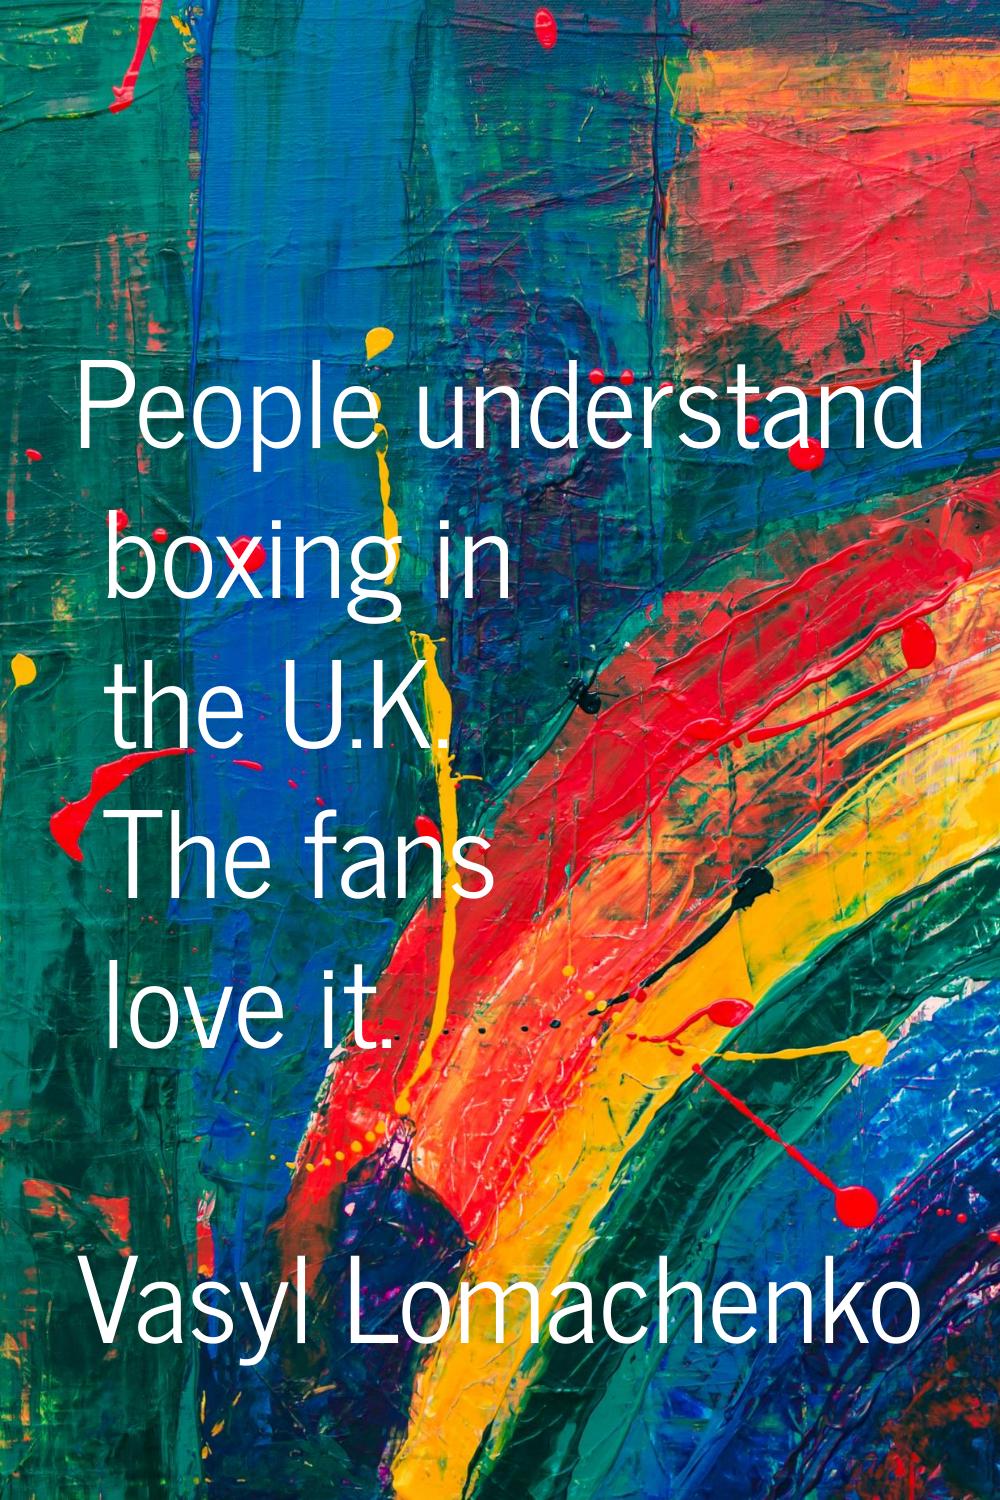 People understand boxing in the U.K. The fans love it.